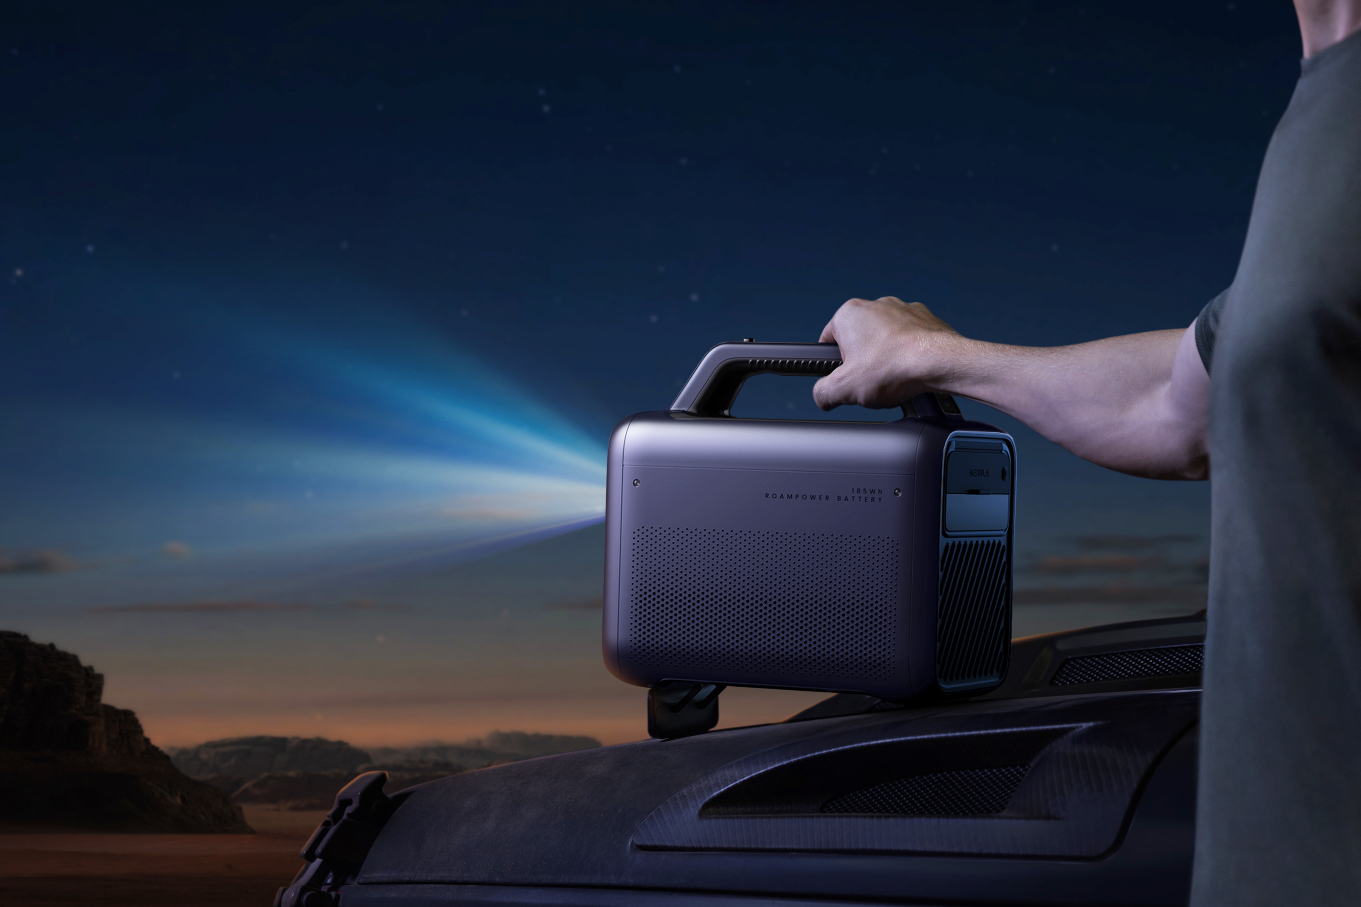 Anker's Nebula Mars 3 projector is bright and outdoor ready | Digital